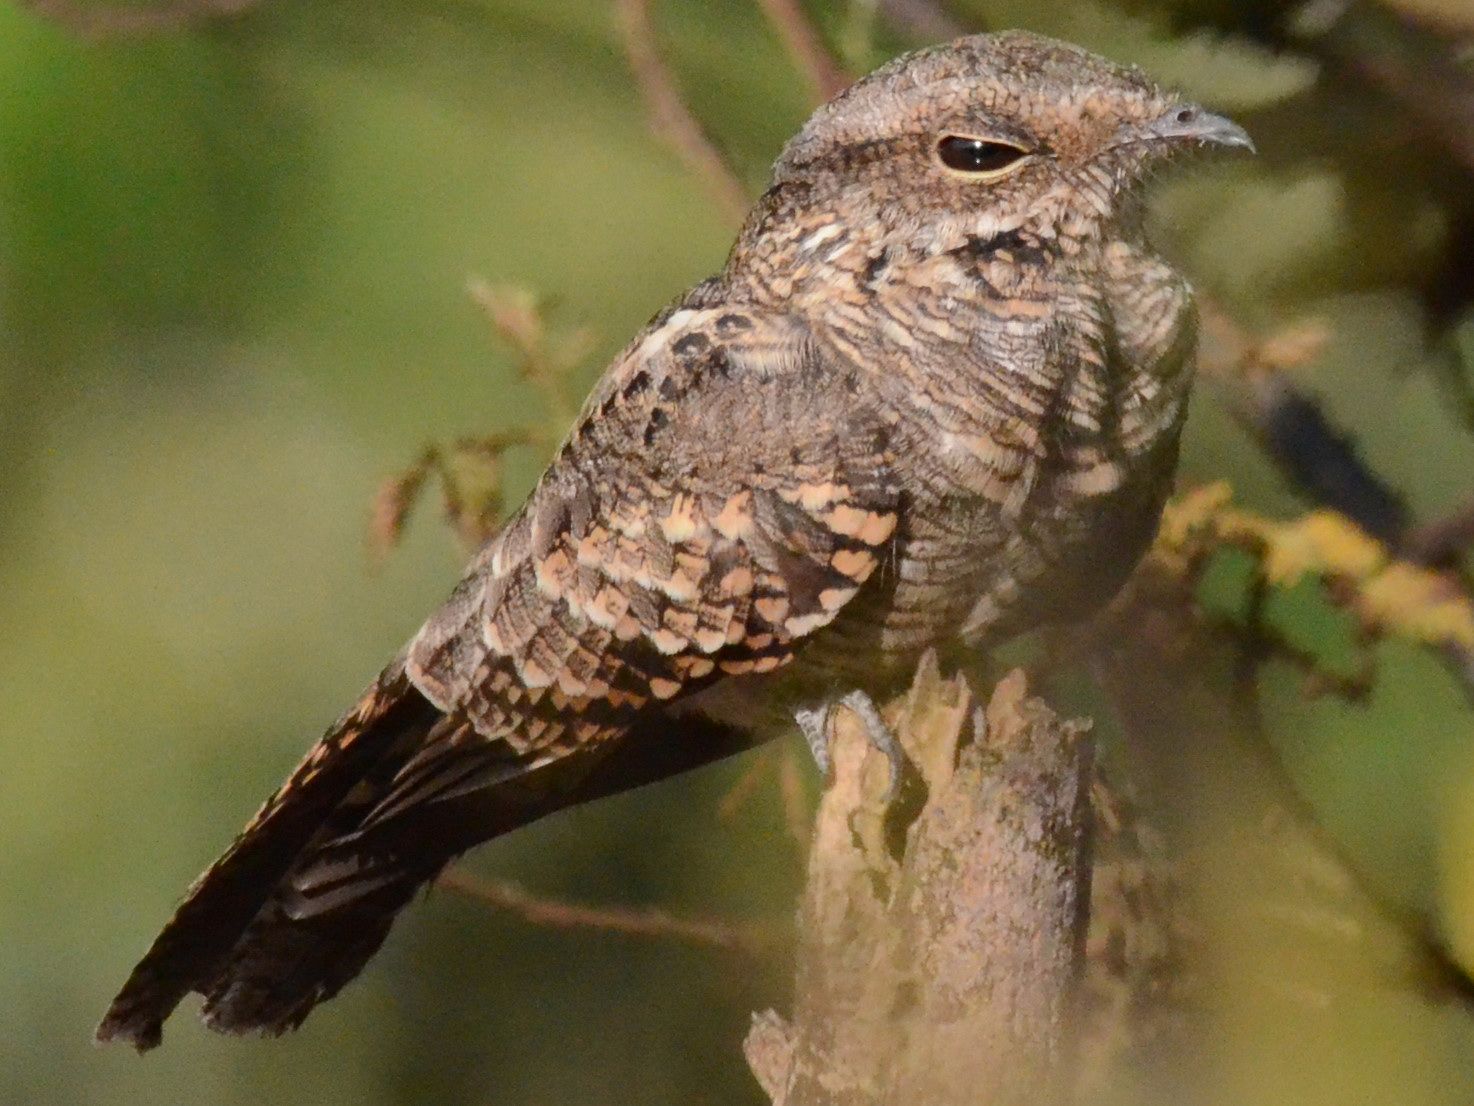 Click picture to see more Ladder-tailed Nightjars.